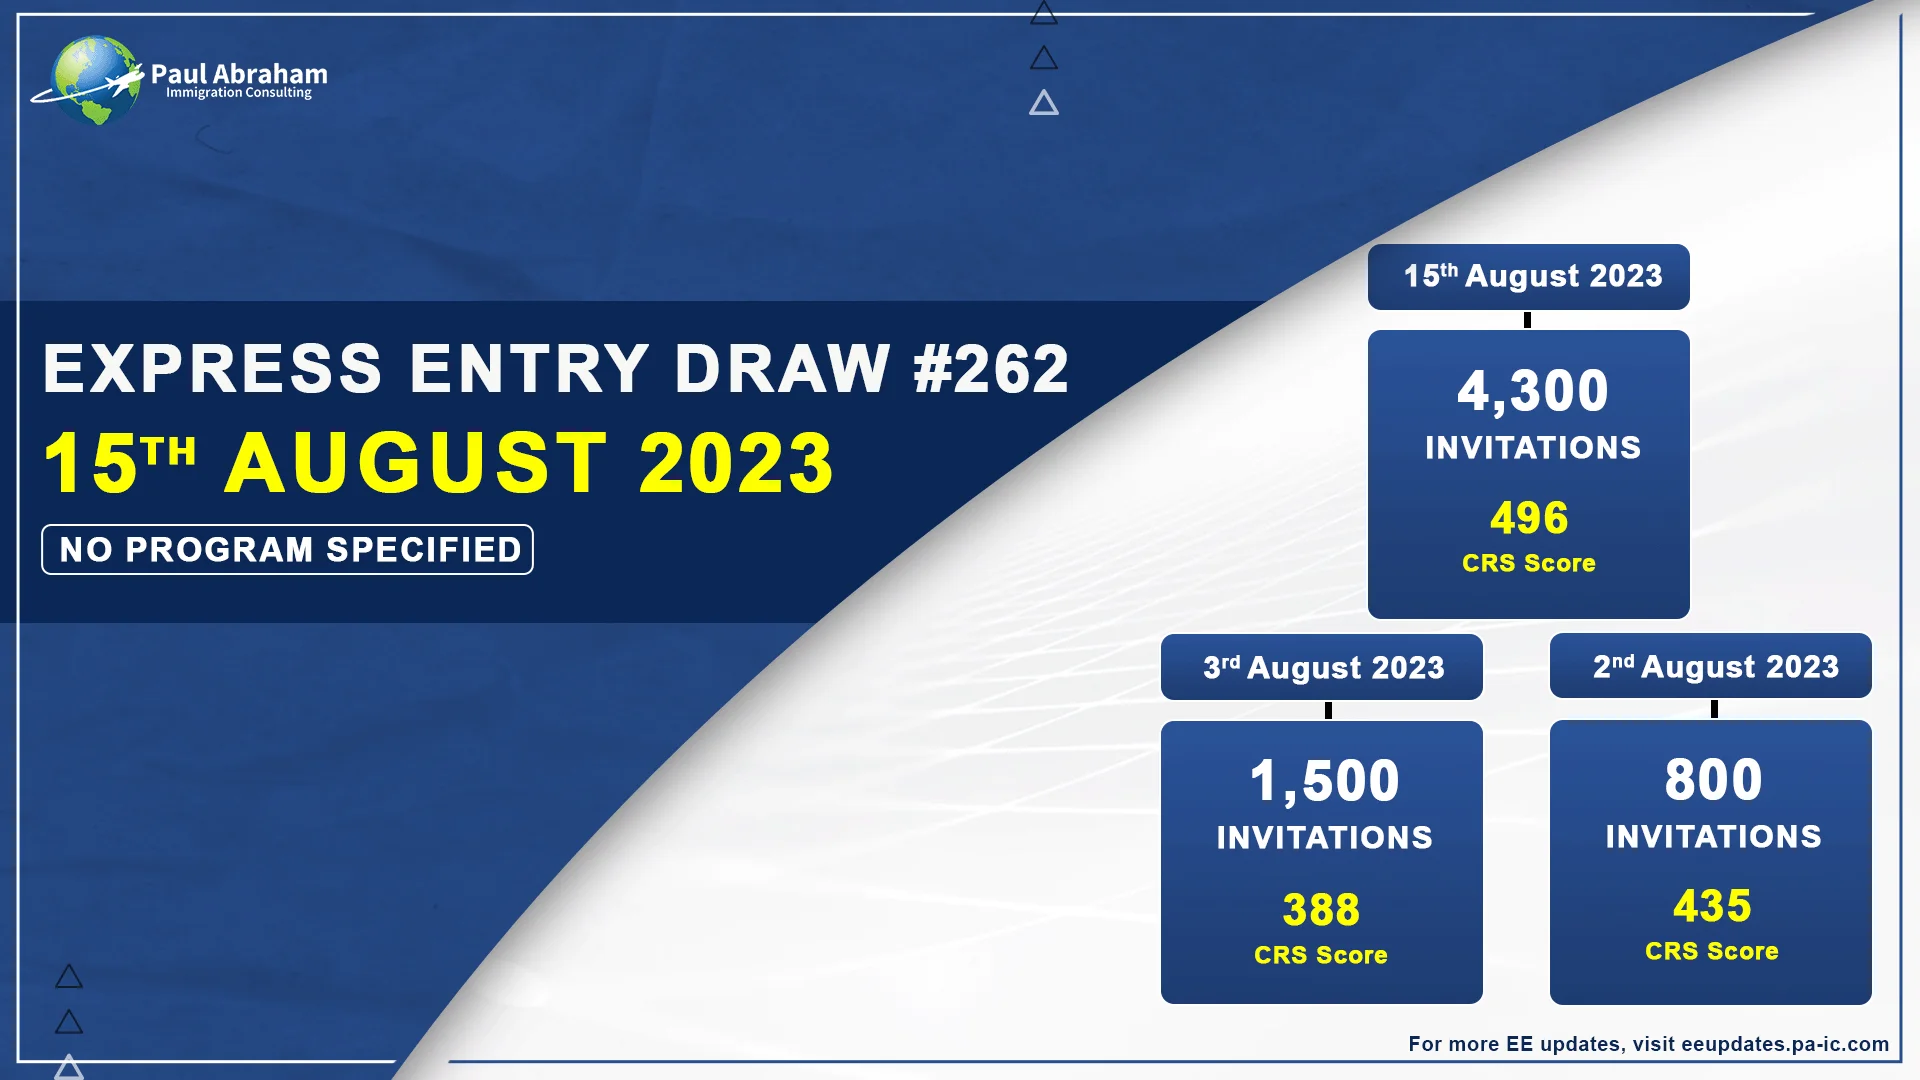 Image is provinding Information about latest express entry draw #262